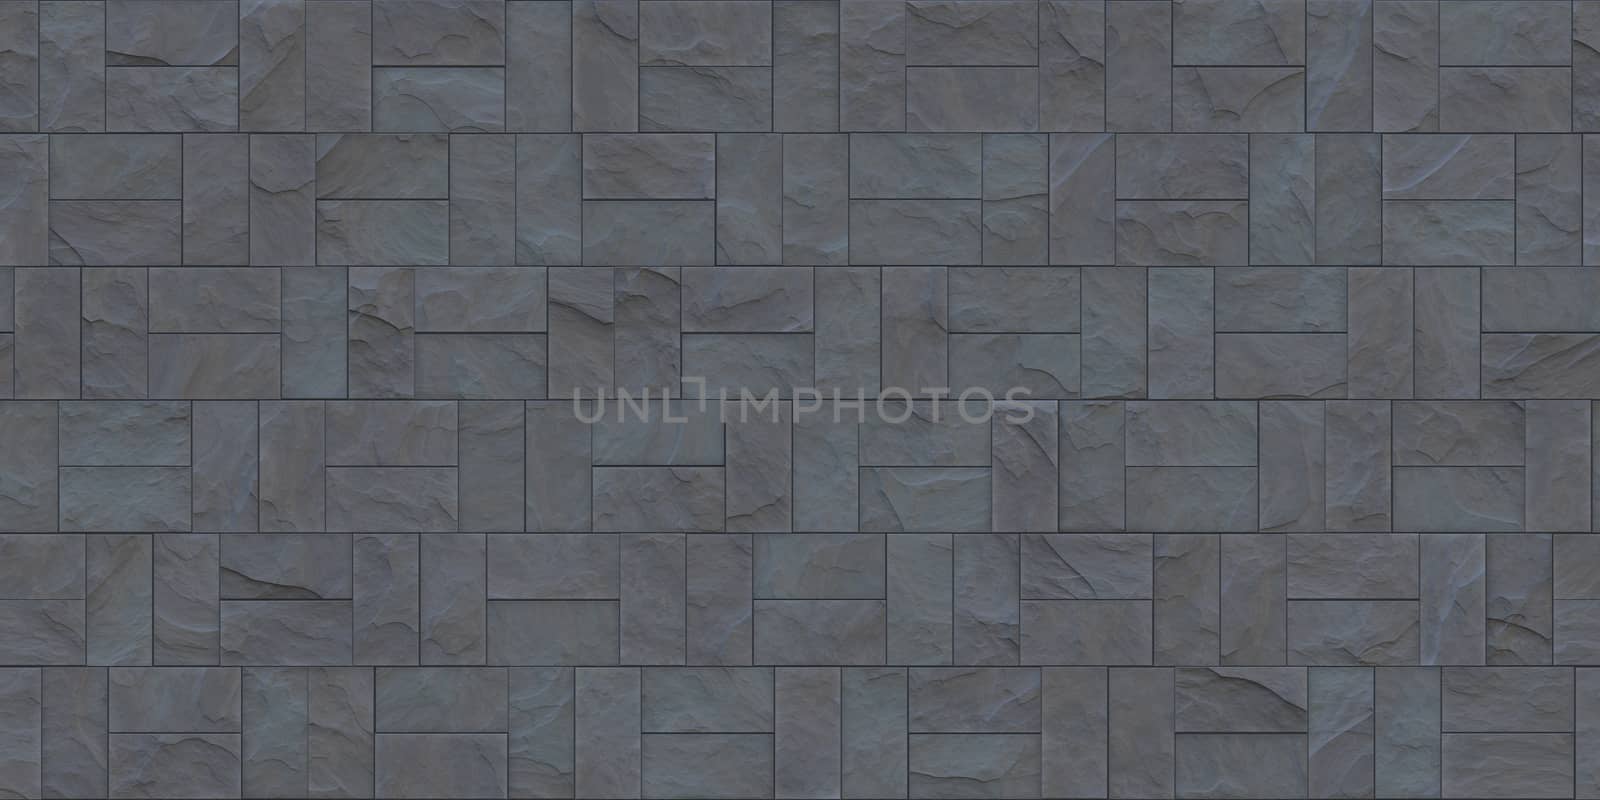 Slate gray outdoor stone cladding seamless surface. Stone tiles facing house wall.